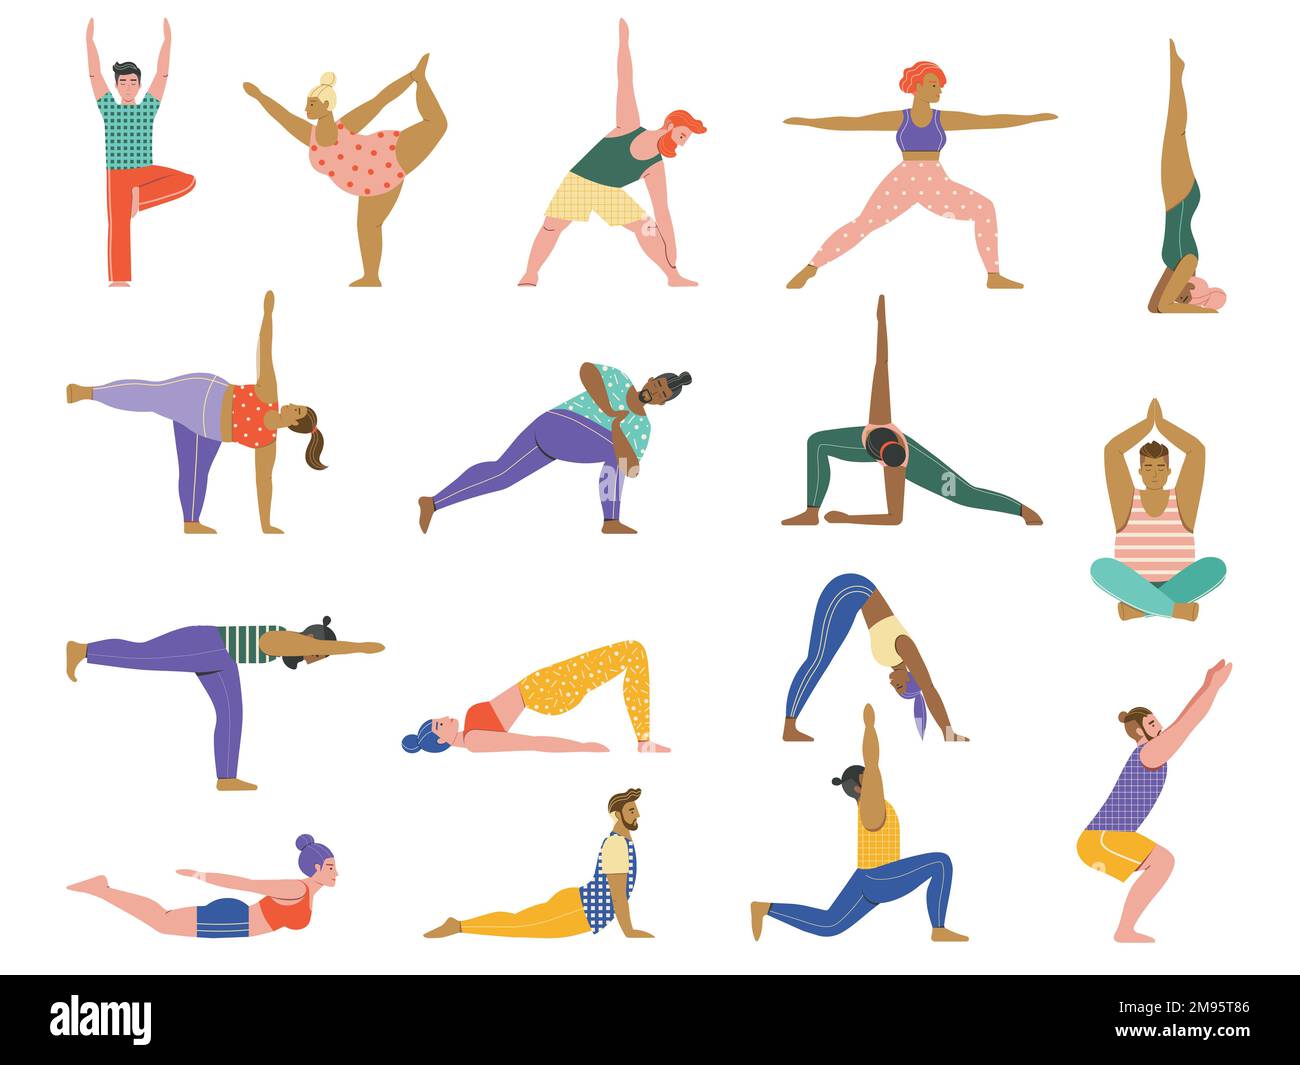 People Doing Common Yoga Poses Set Stock Vector